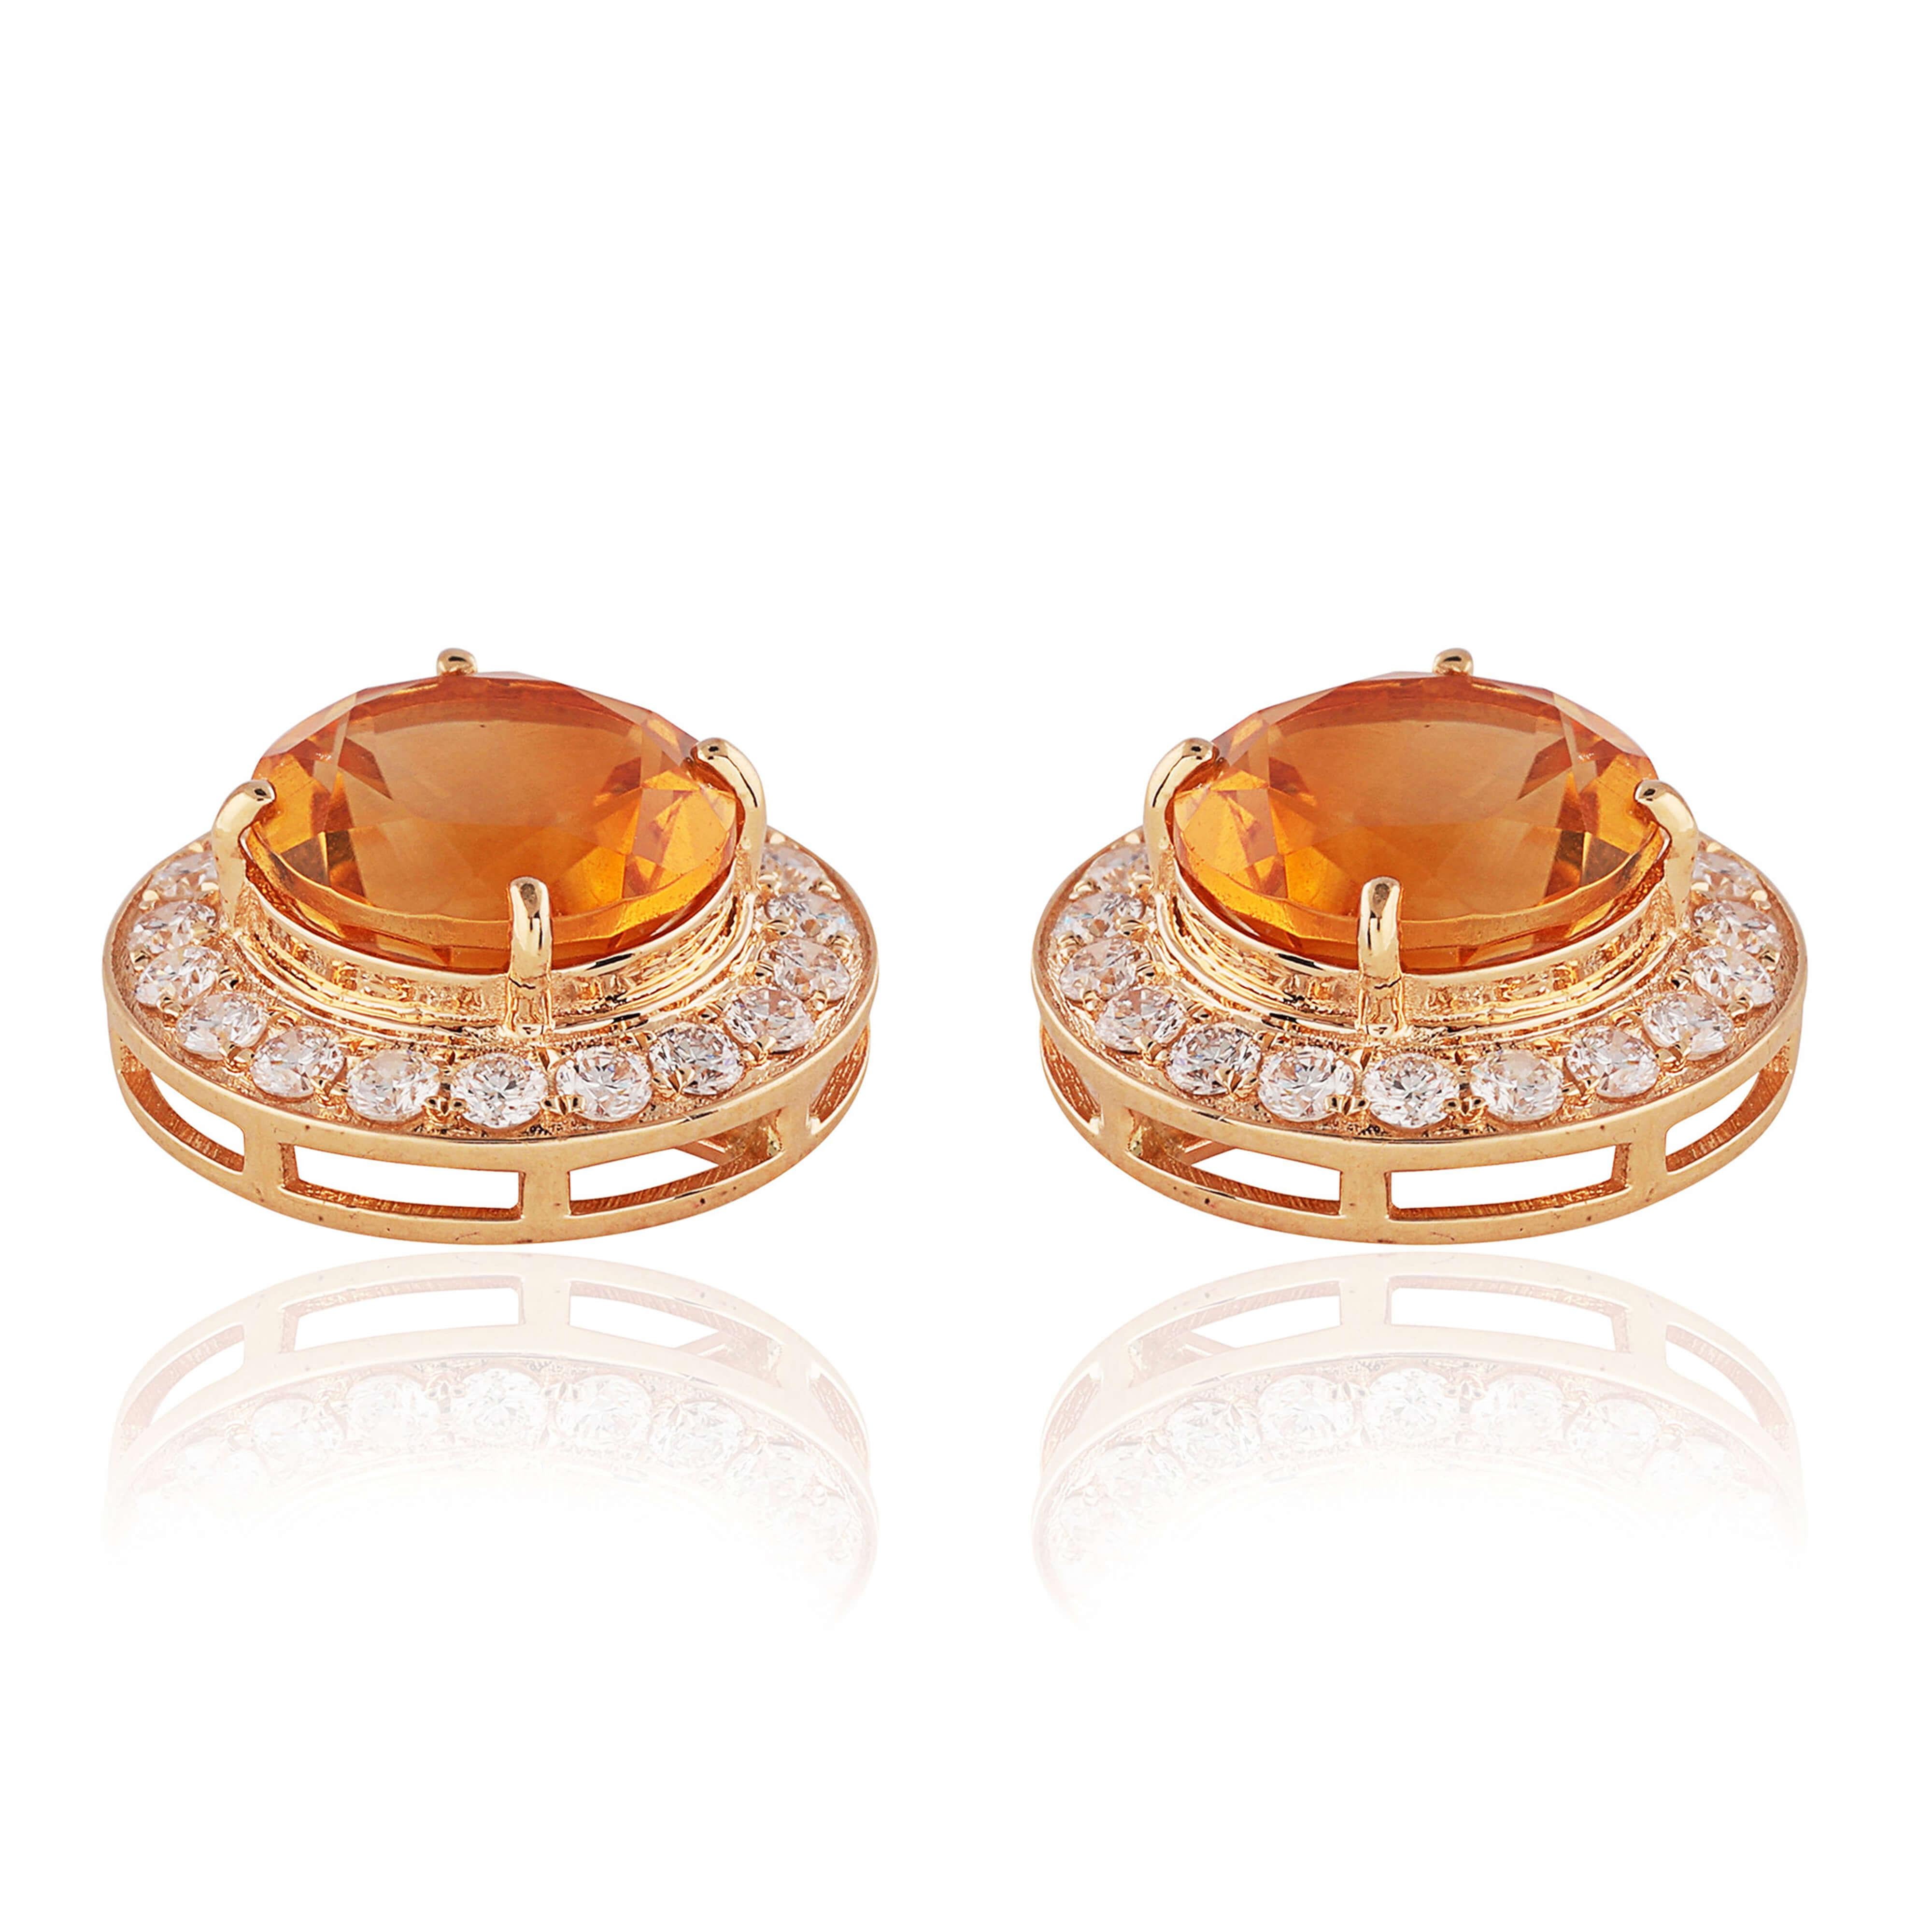 A forever piece of jewellery. A classic, an heirloom. A great (‘can’t go wrong) gift!

Set on 18kt gold with consciously sourced round cut brilliant diamonds and high topaz.

3.7 grams 18kt gold; 0.59 carat round brilliant cut diamonds; 3.66 carat